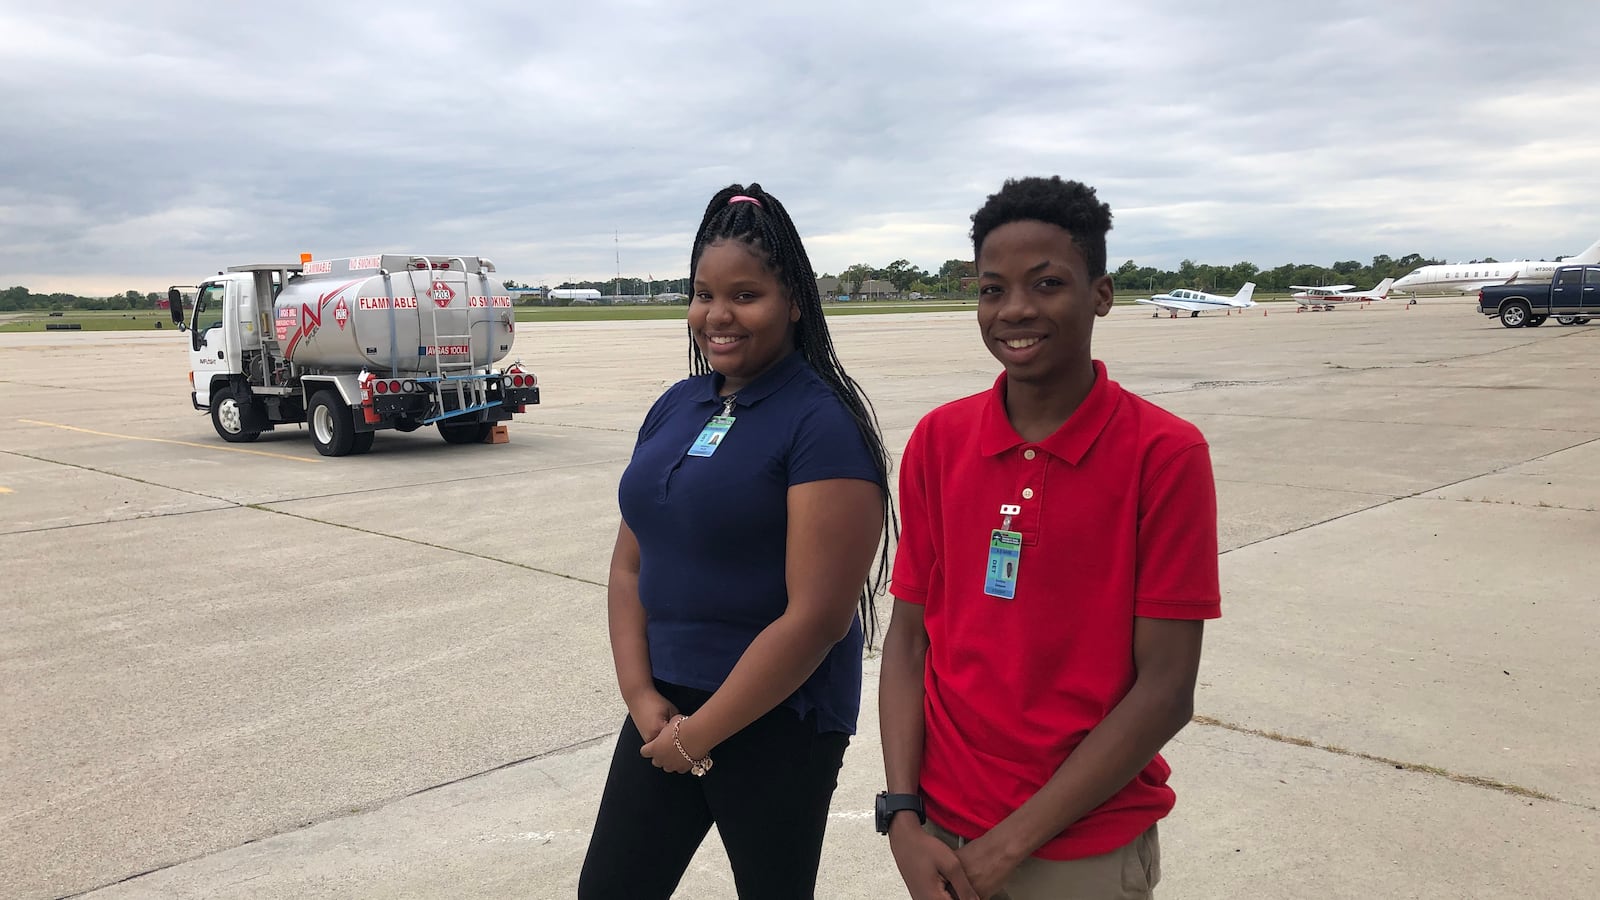 Kimberly Pruitt and Jeramiah Simpson are among the first Detroit students to take classes at the municipal airport since 2013.